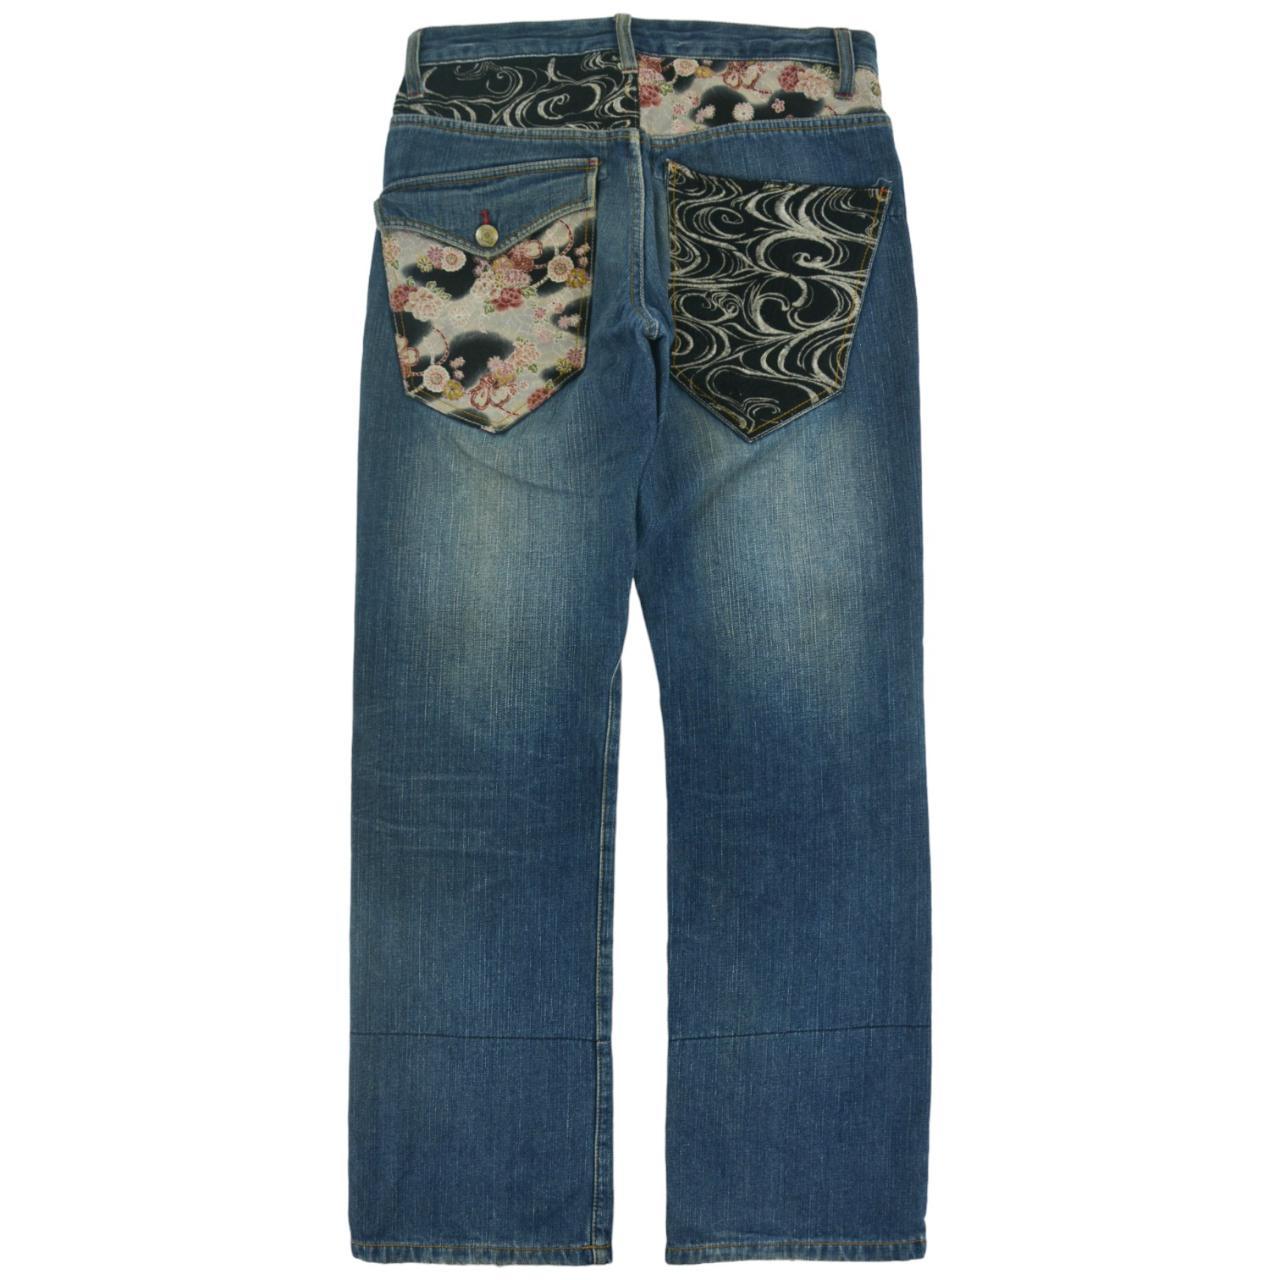 HKAAKH Men's Embroidered Jeans, Vintage Japanese Ukiyo-e Embroidered Blue Jeans